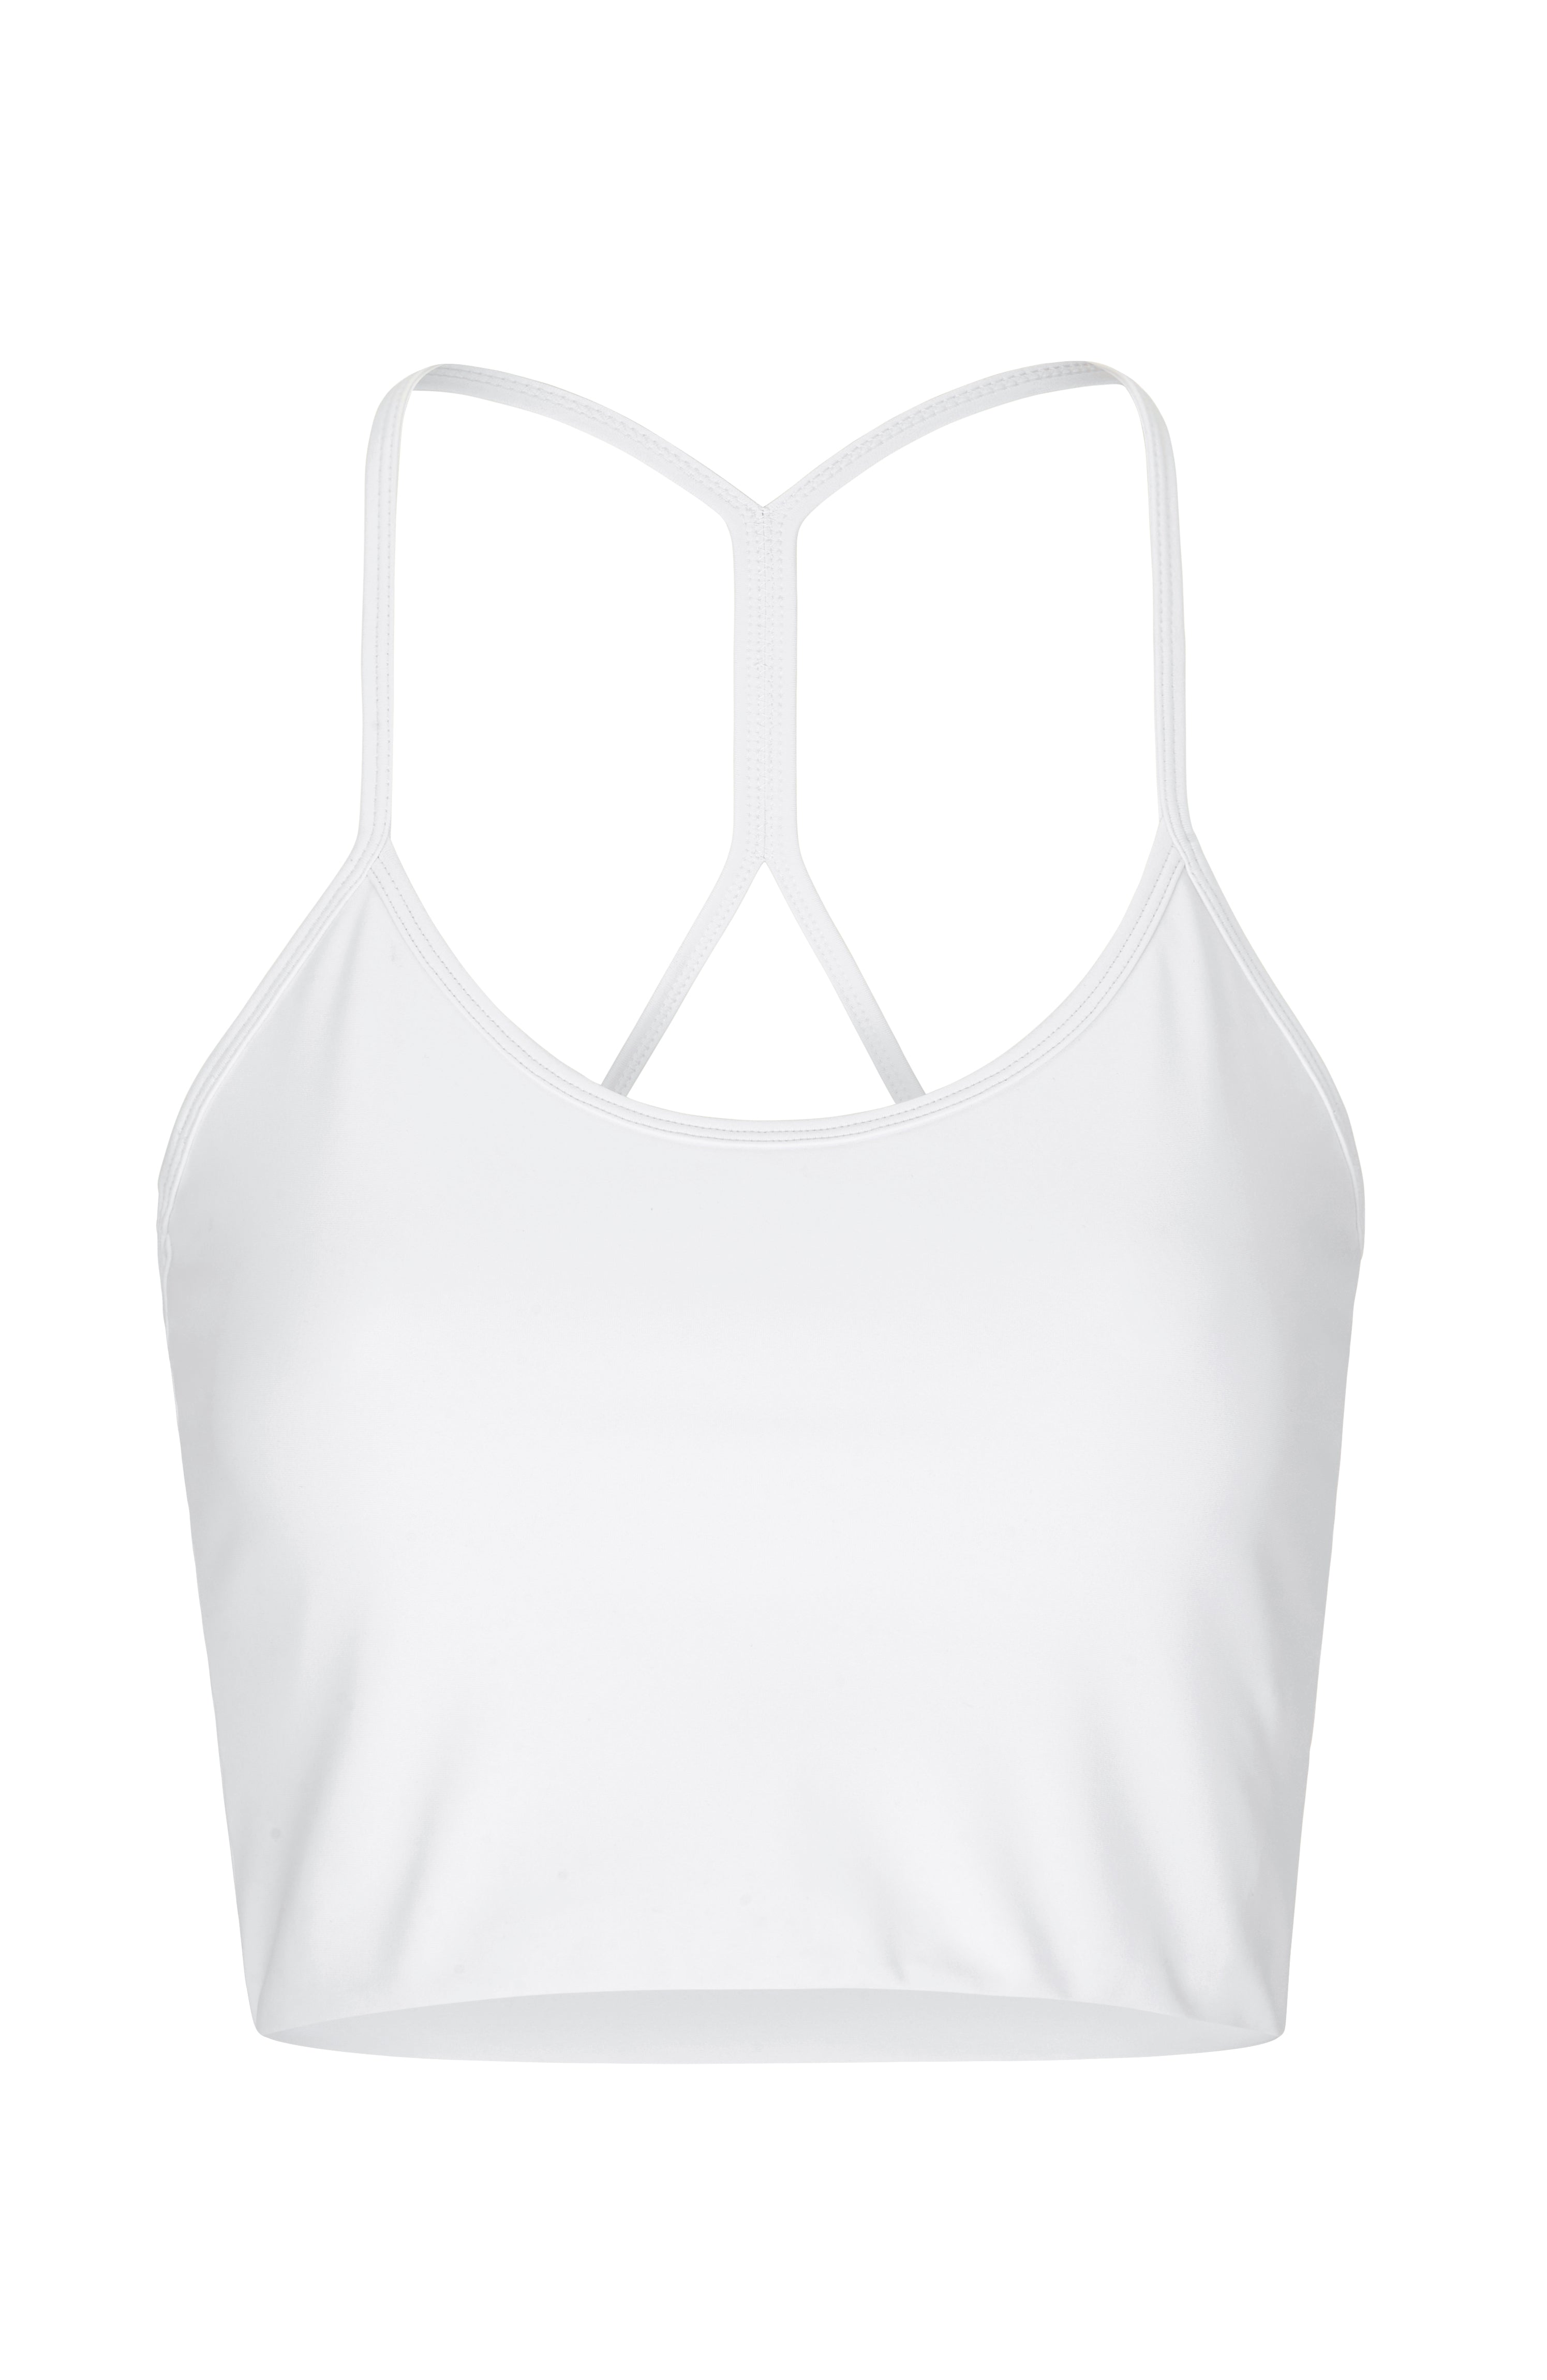 Sisterly Tribe - Yoga Singlet Top White. Light support, Thin shoulder strap, minimalistic design, Buttery Soft and light, matte fabric.